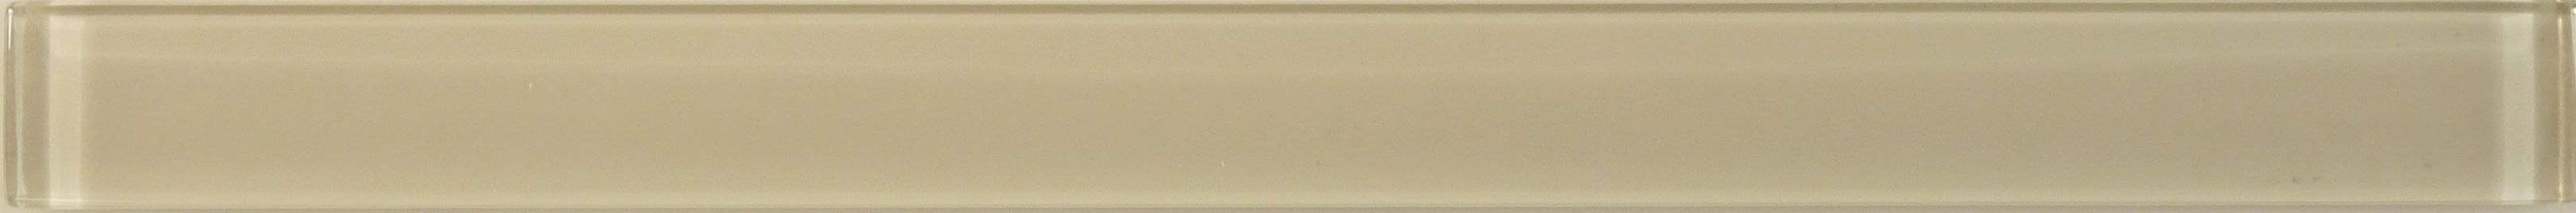 Ivory Cream 1" x 12" Glossy Glass Liner Millenium Products